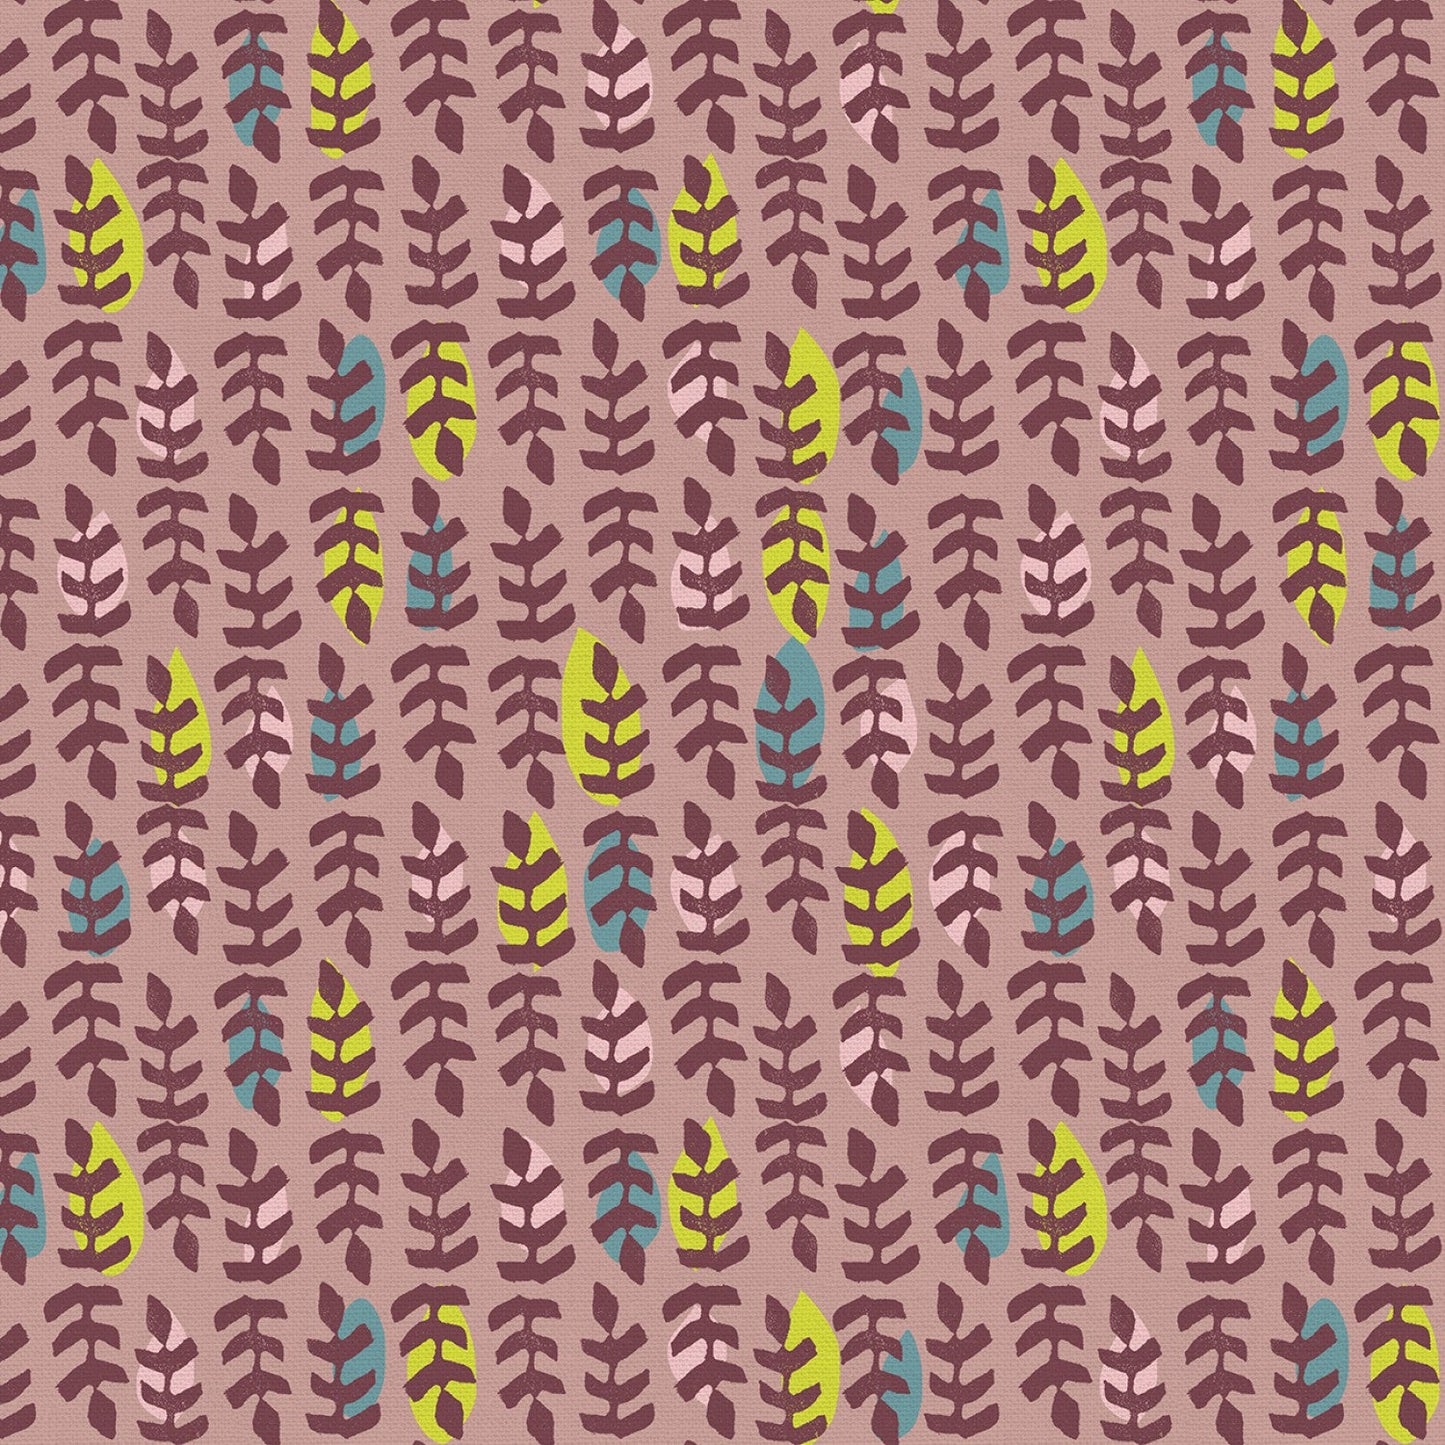 New Abstracts Stamped Leaf Pink ½ yd-Fabric-Spool of Thread